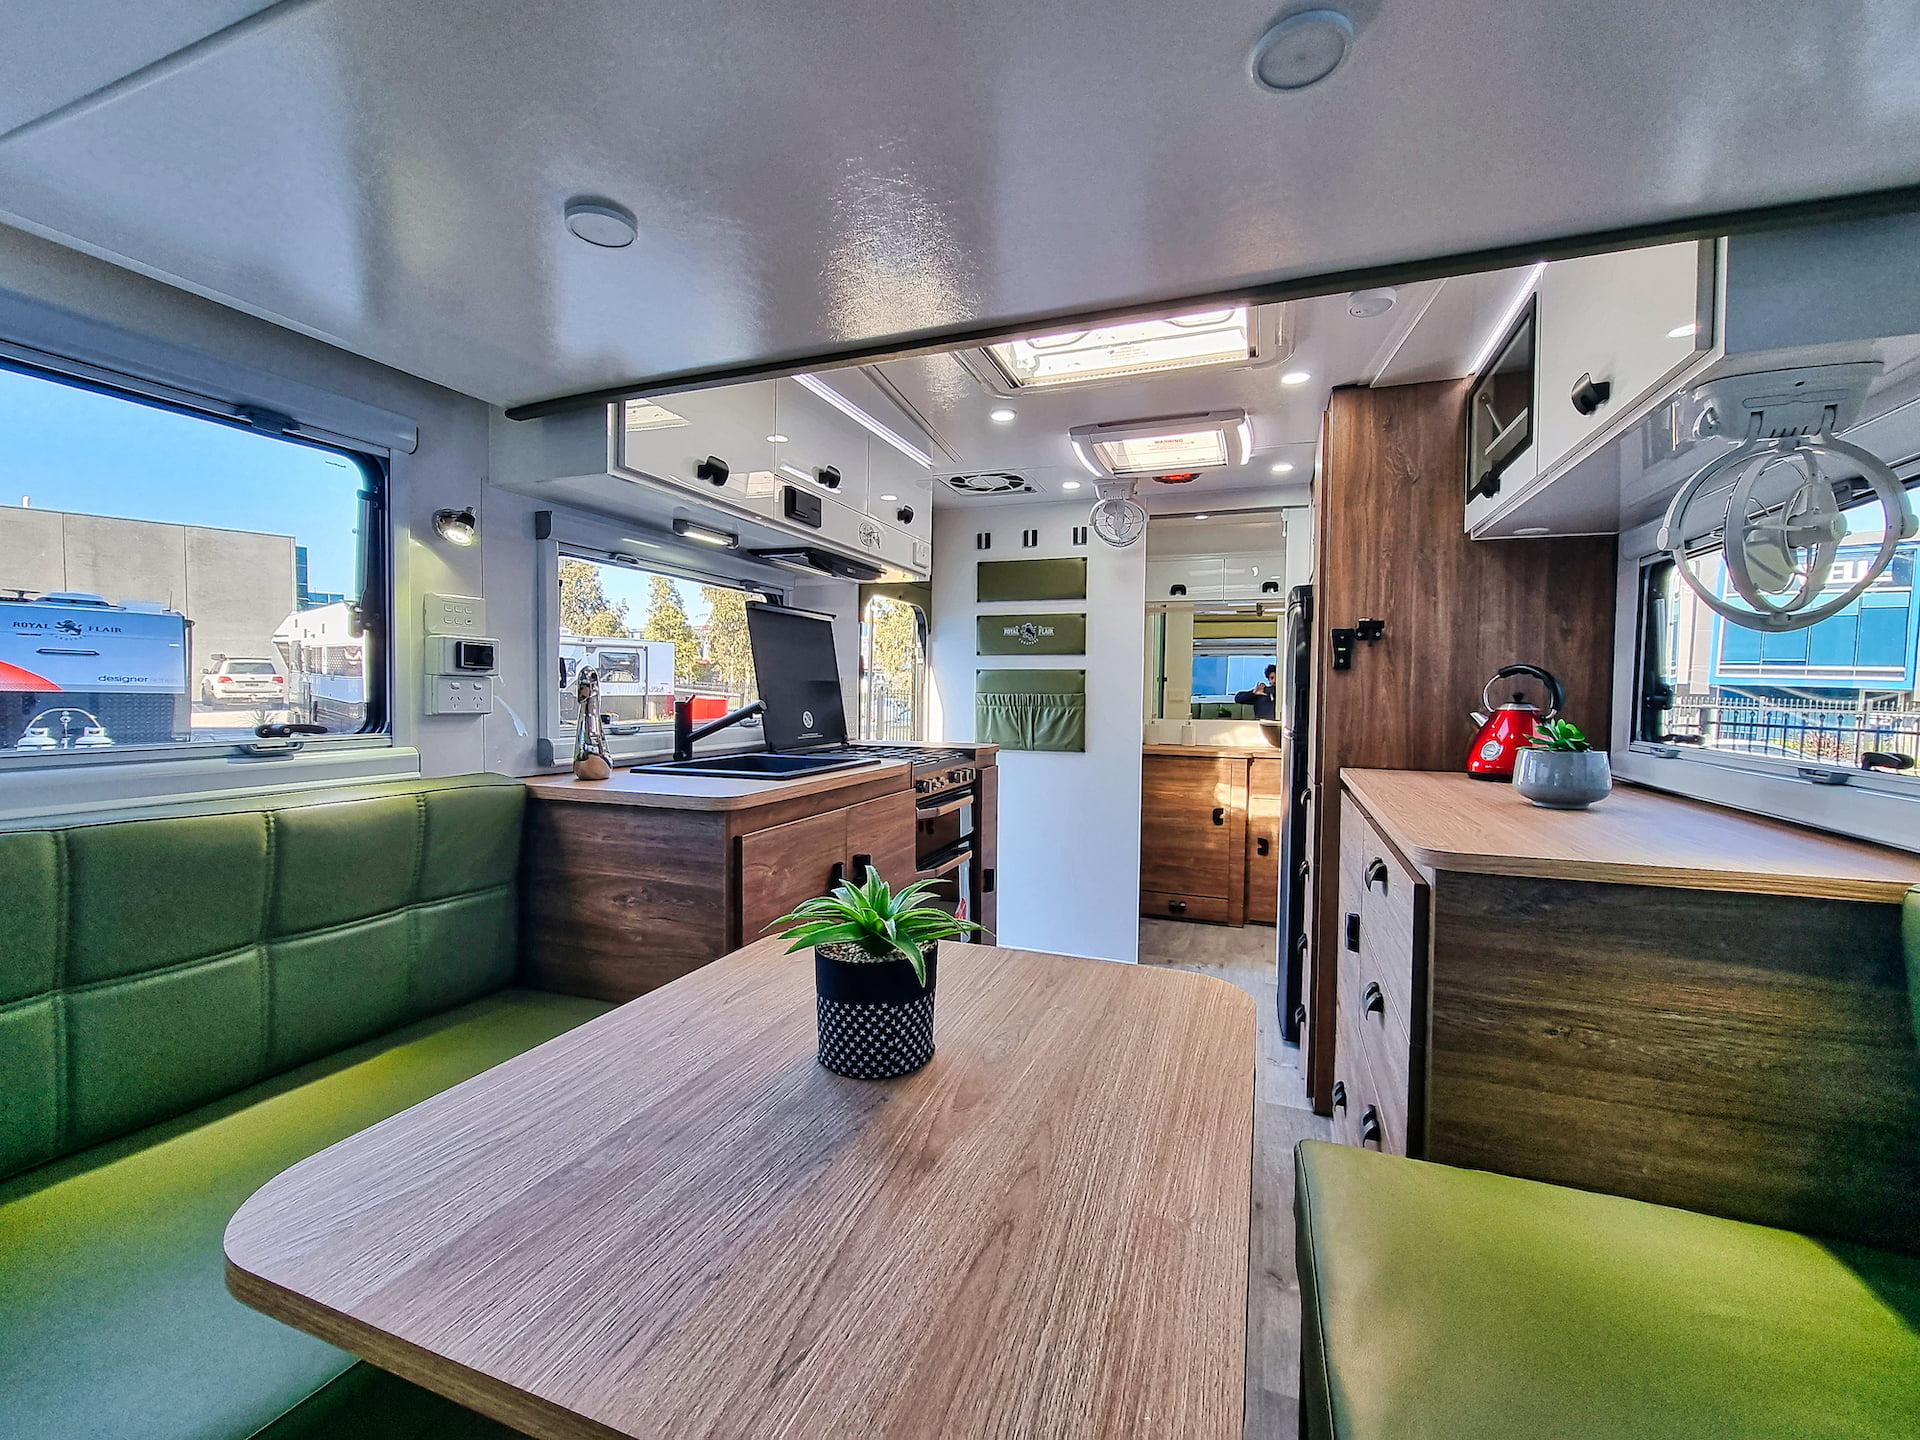 The Royal Flair Aussiemate caravan merges luxury with practicality, offering a warm kitchen, light-filled spaces, and neat storage